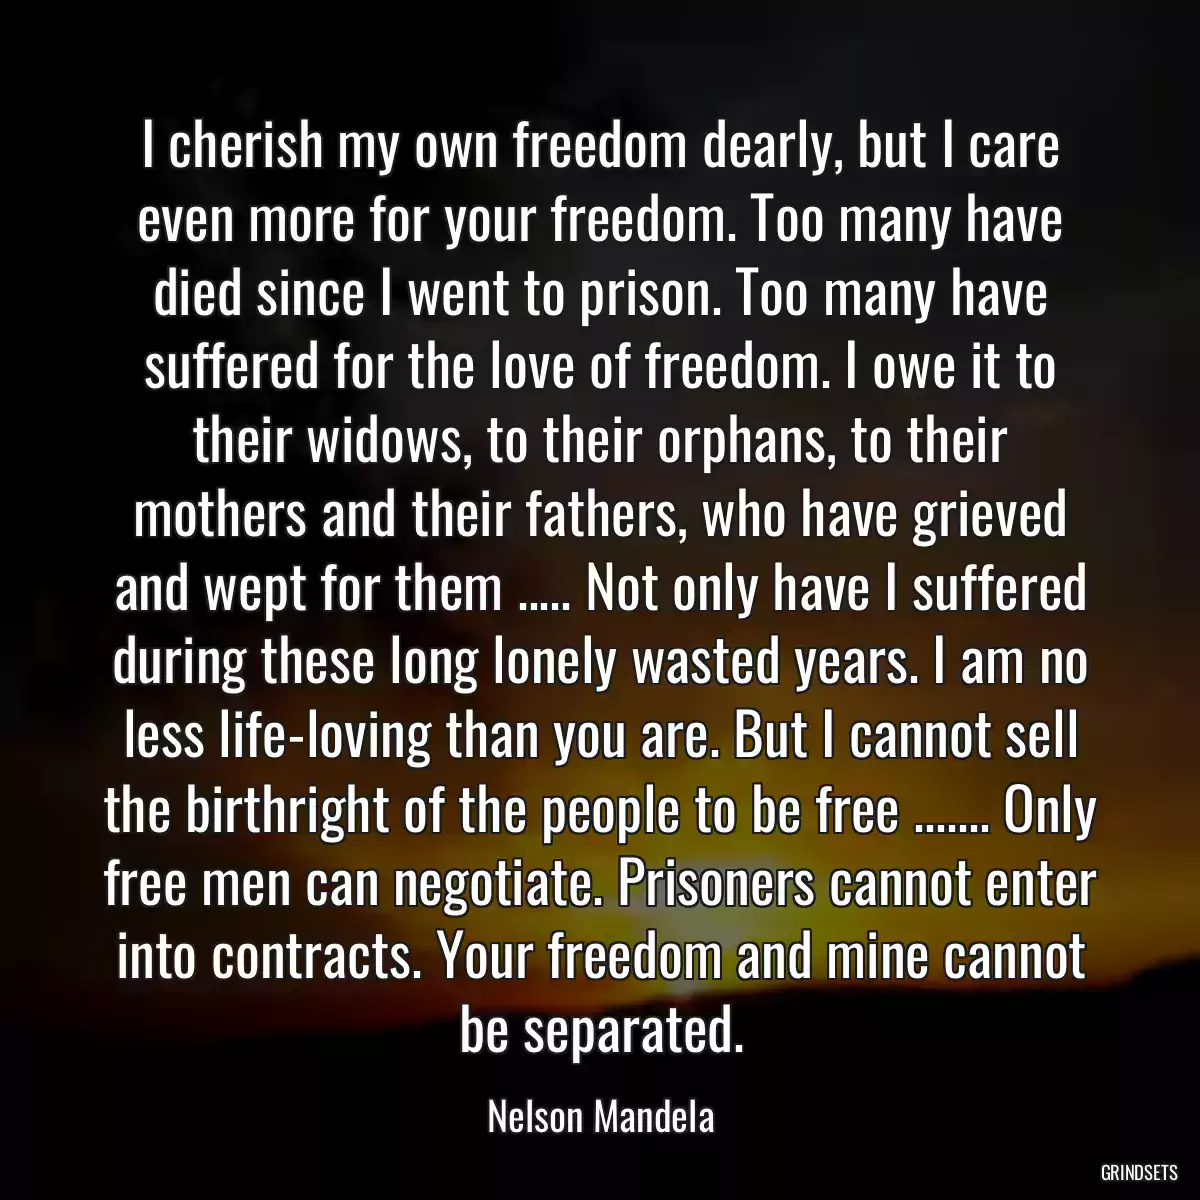 I cherish my own freedom dearly, but I care even more for your freedom. Too many have died since I went to prison. Too many have suffered for the love of freedom. I owe it to their widows, to their orphans, to their mothers and their fathers, who have grieved and wept for them ..... Not only have I suffered during these long lonely wasted years. I am no less life-loving than you are. But I cannot sell the birthright of the people to be free ....... Only free men can negotiate. Prisoners cannot enter into contracts. Your freedom and mine cannot be separated.